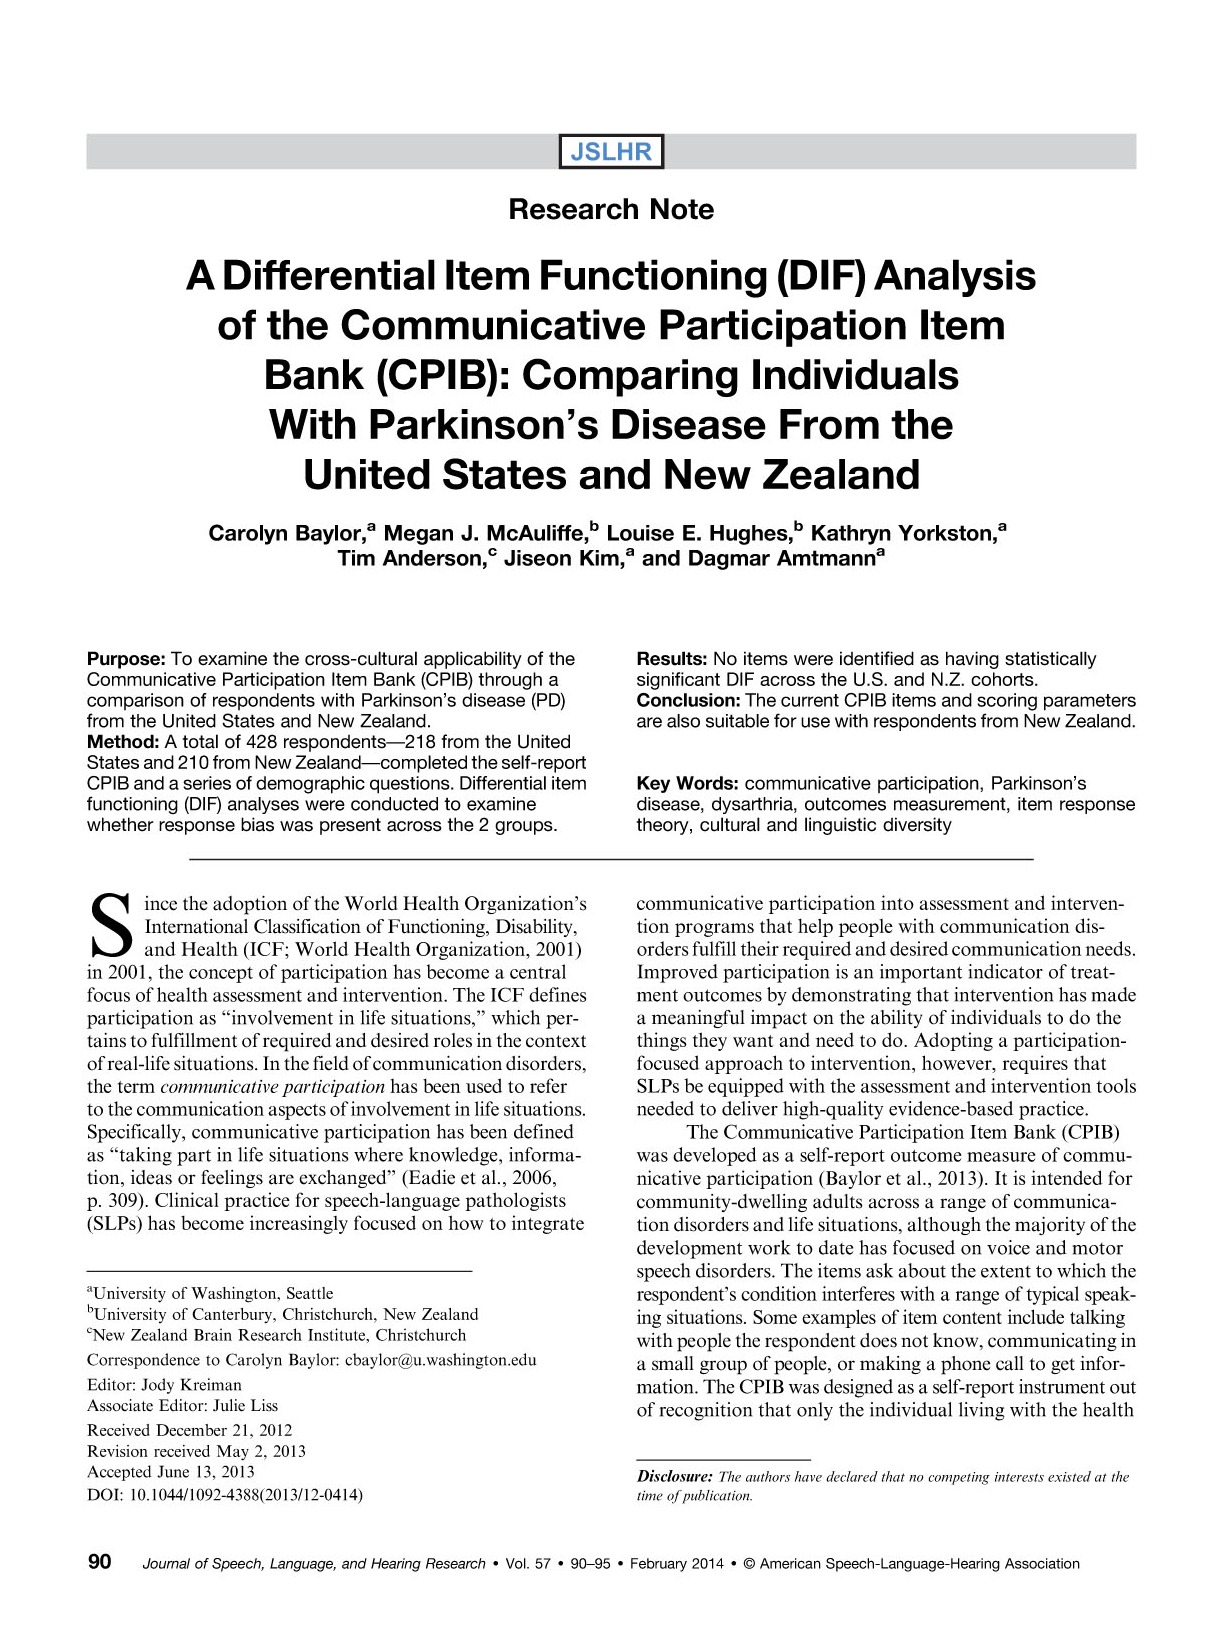 Download A differential item functioning (DIF) analysis of the Communicative Participation Item Bank (CPIB): Comparing individuals with Parkinson's disease from the United States and New Zealand.